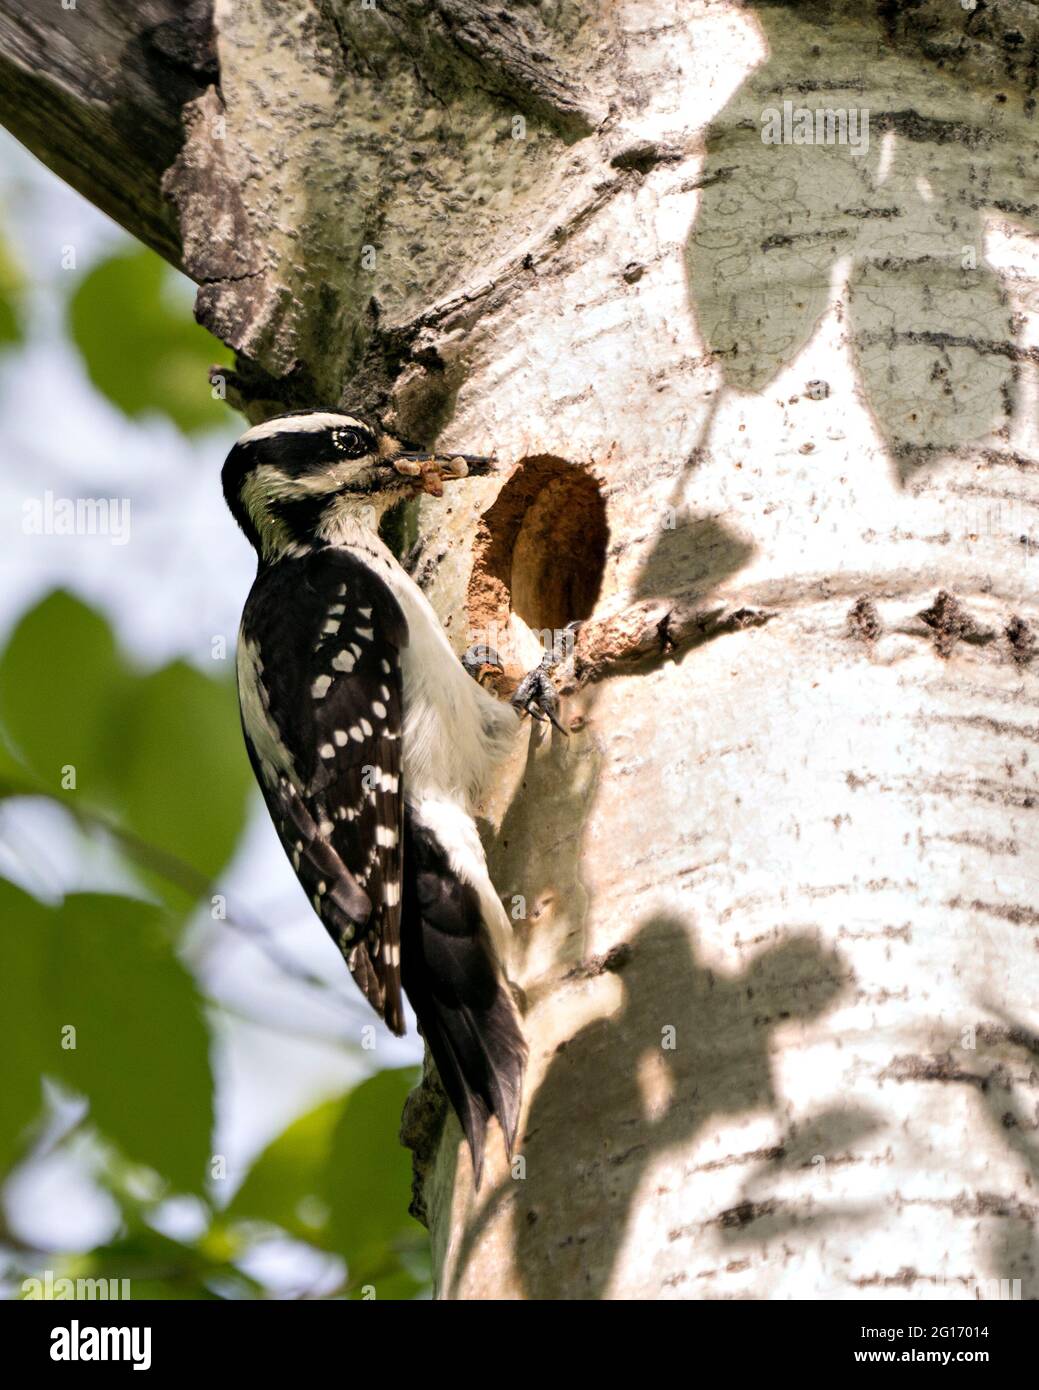 Woodpecker looking in its nest home inside tree trunk in its environment and habitat with insect food. Image. Picture. Portrait. Stock Photo